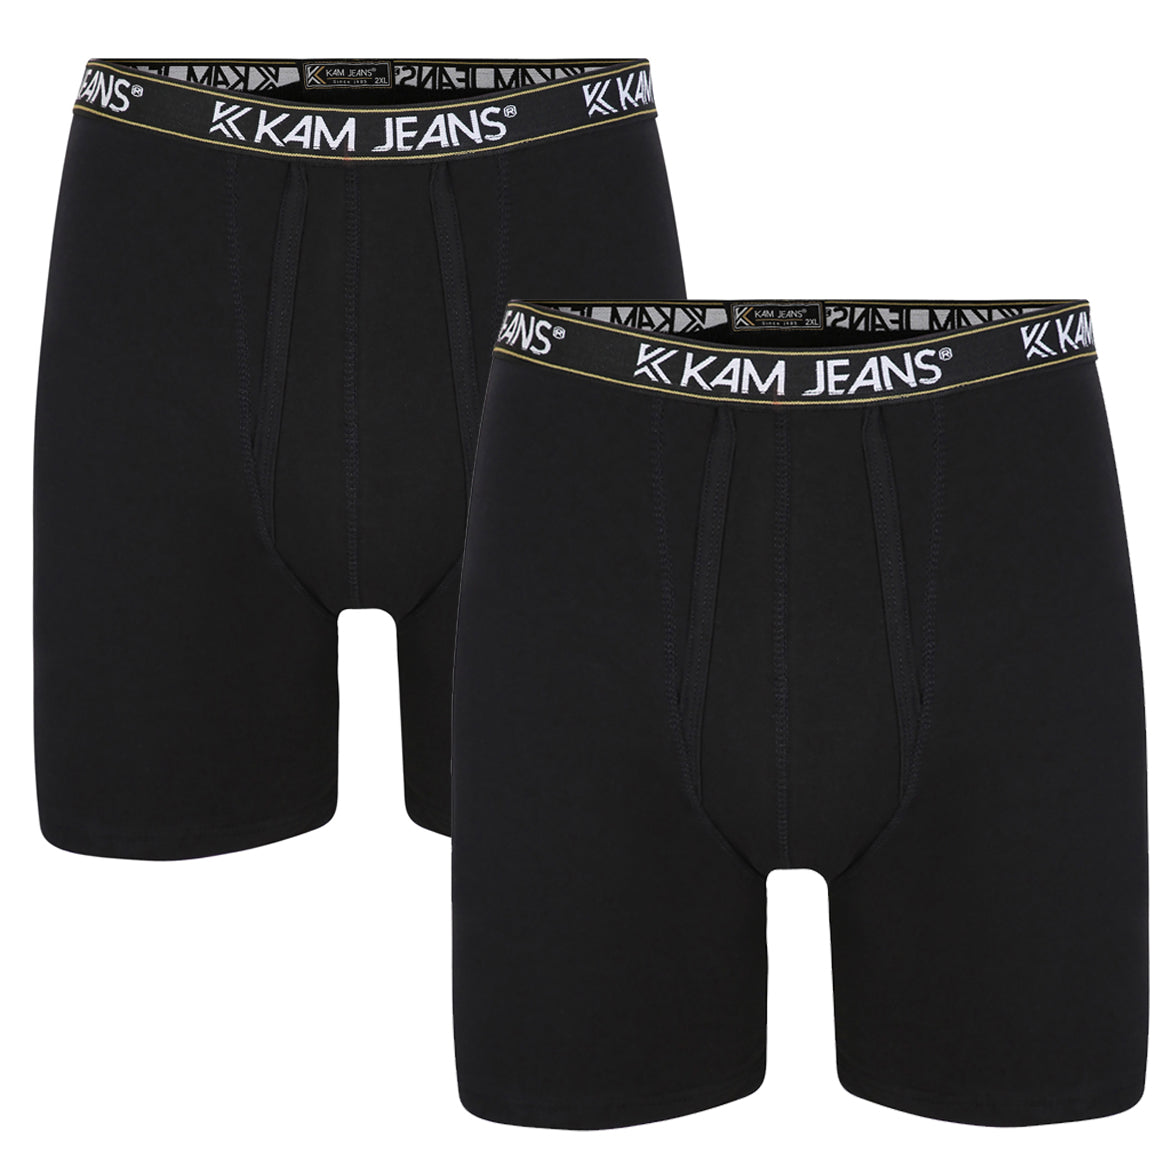 Twin Pack Jersey Boxer Shorts